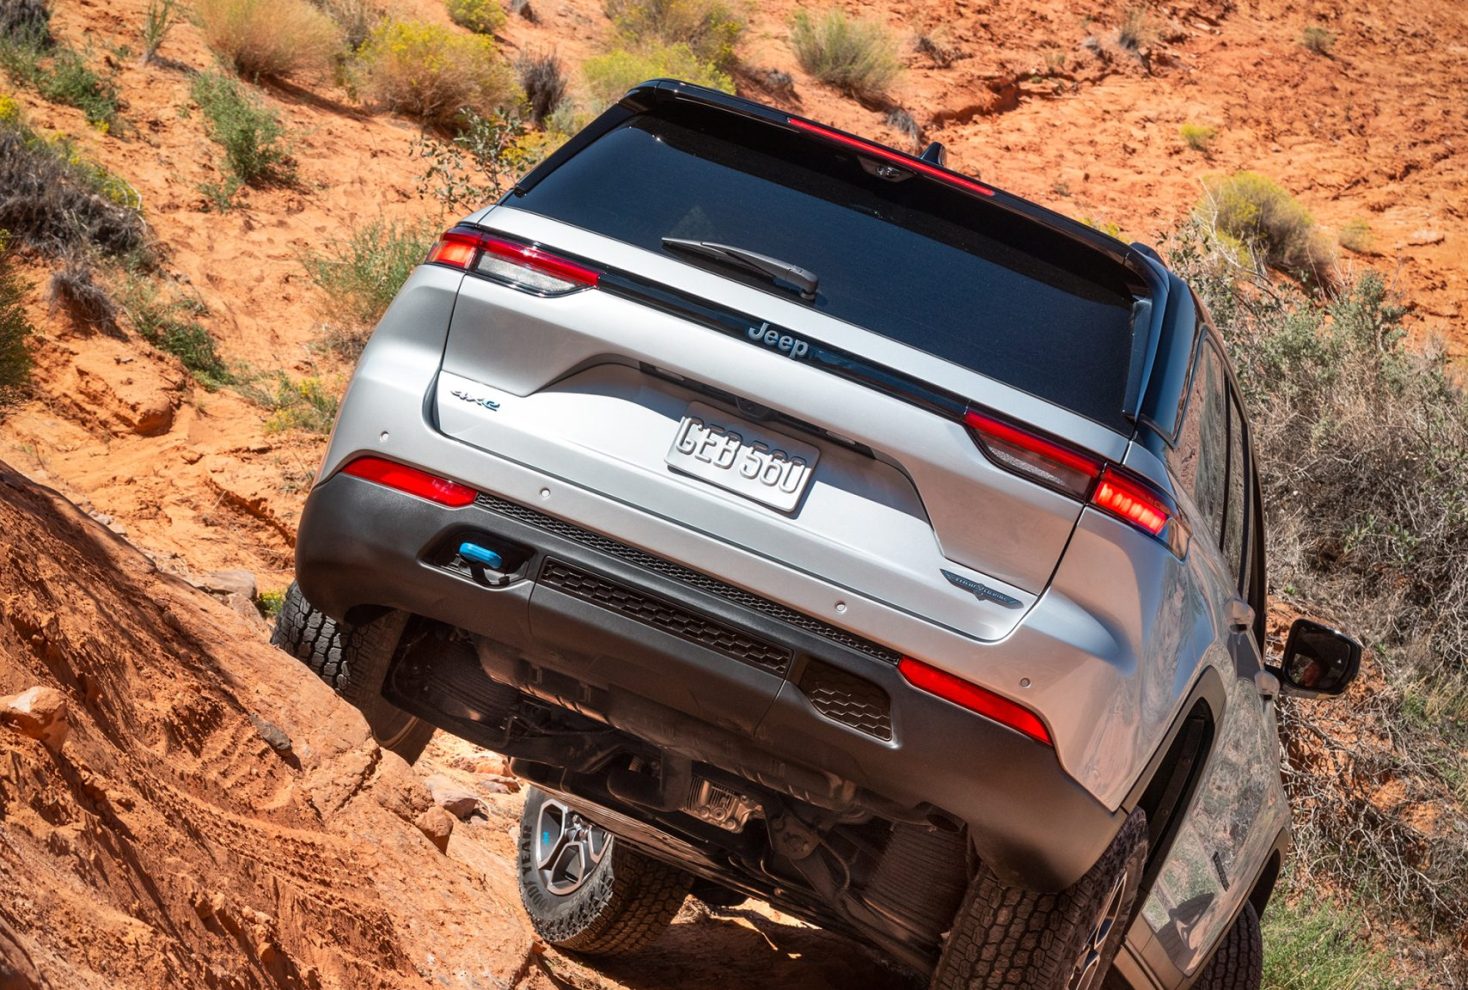 Cars.com Awards the Jeep Grand Cherokee Their Best SUV of 2023